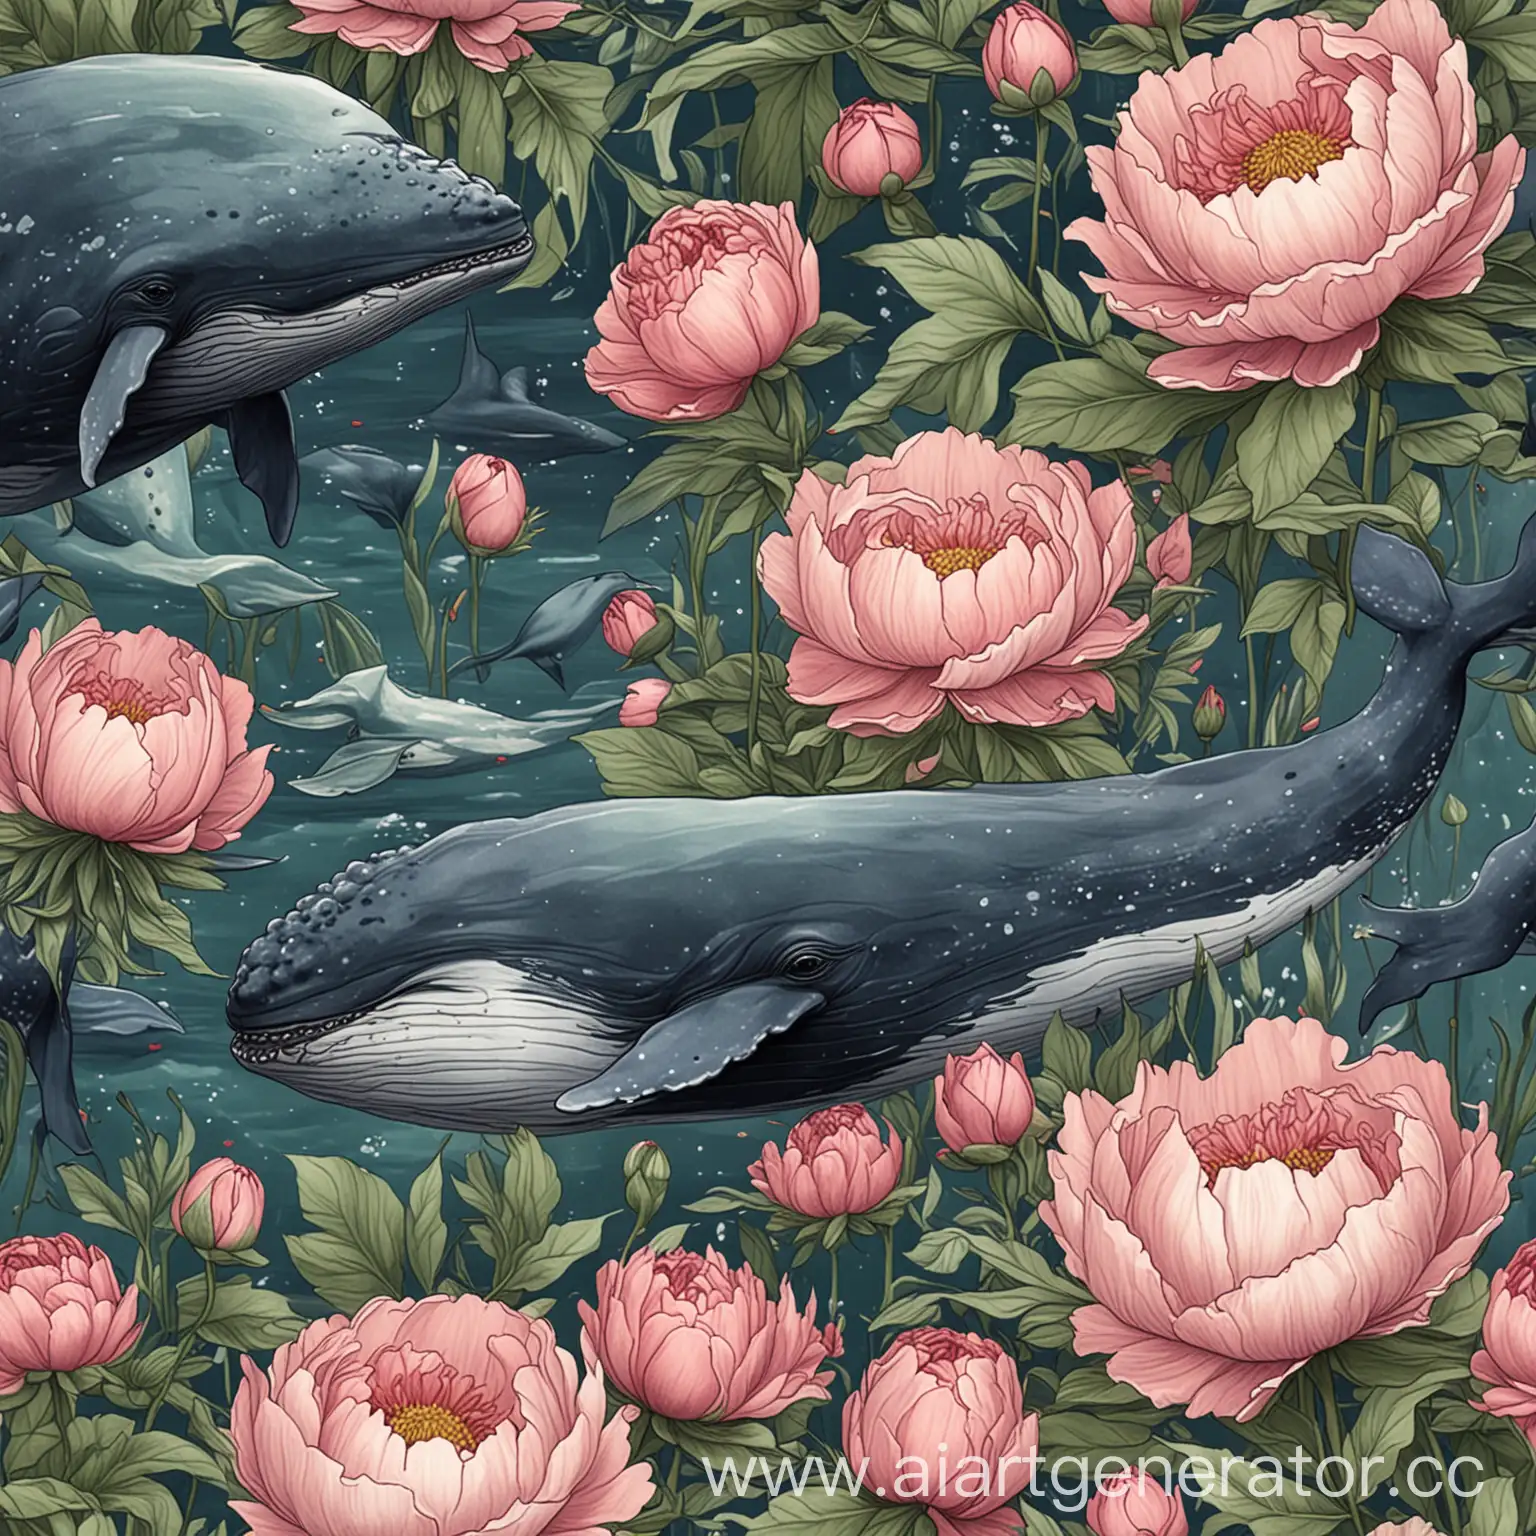 Whales-Swimming-Among-Peonies-Surreal-Underwater-Floral-Scene